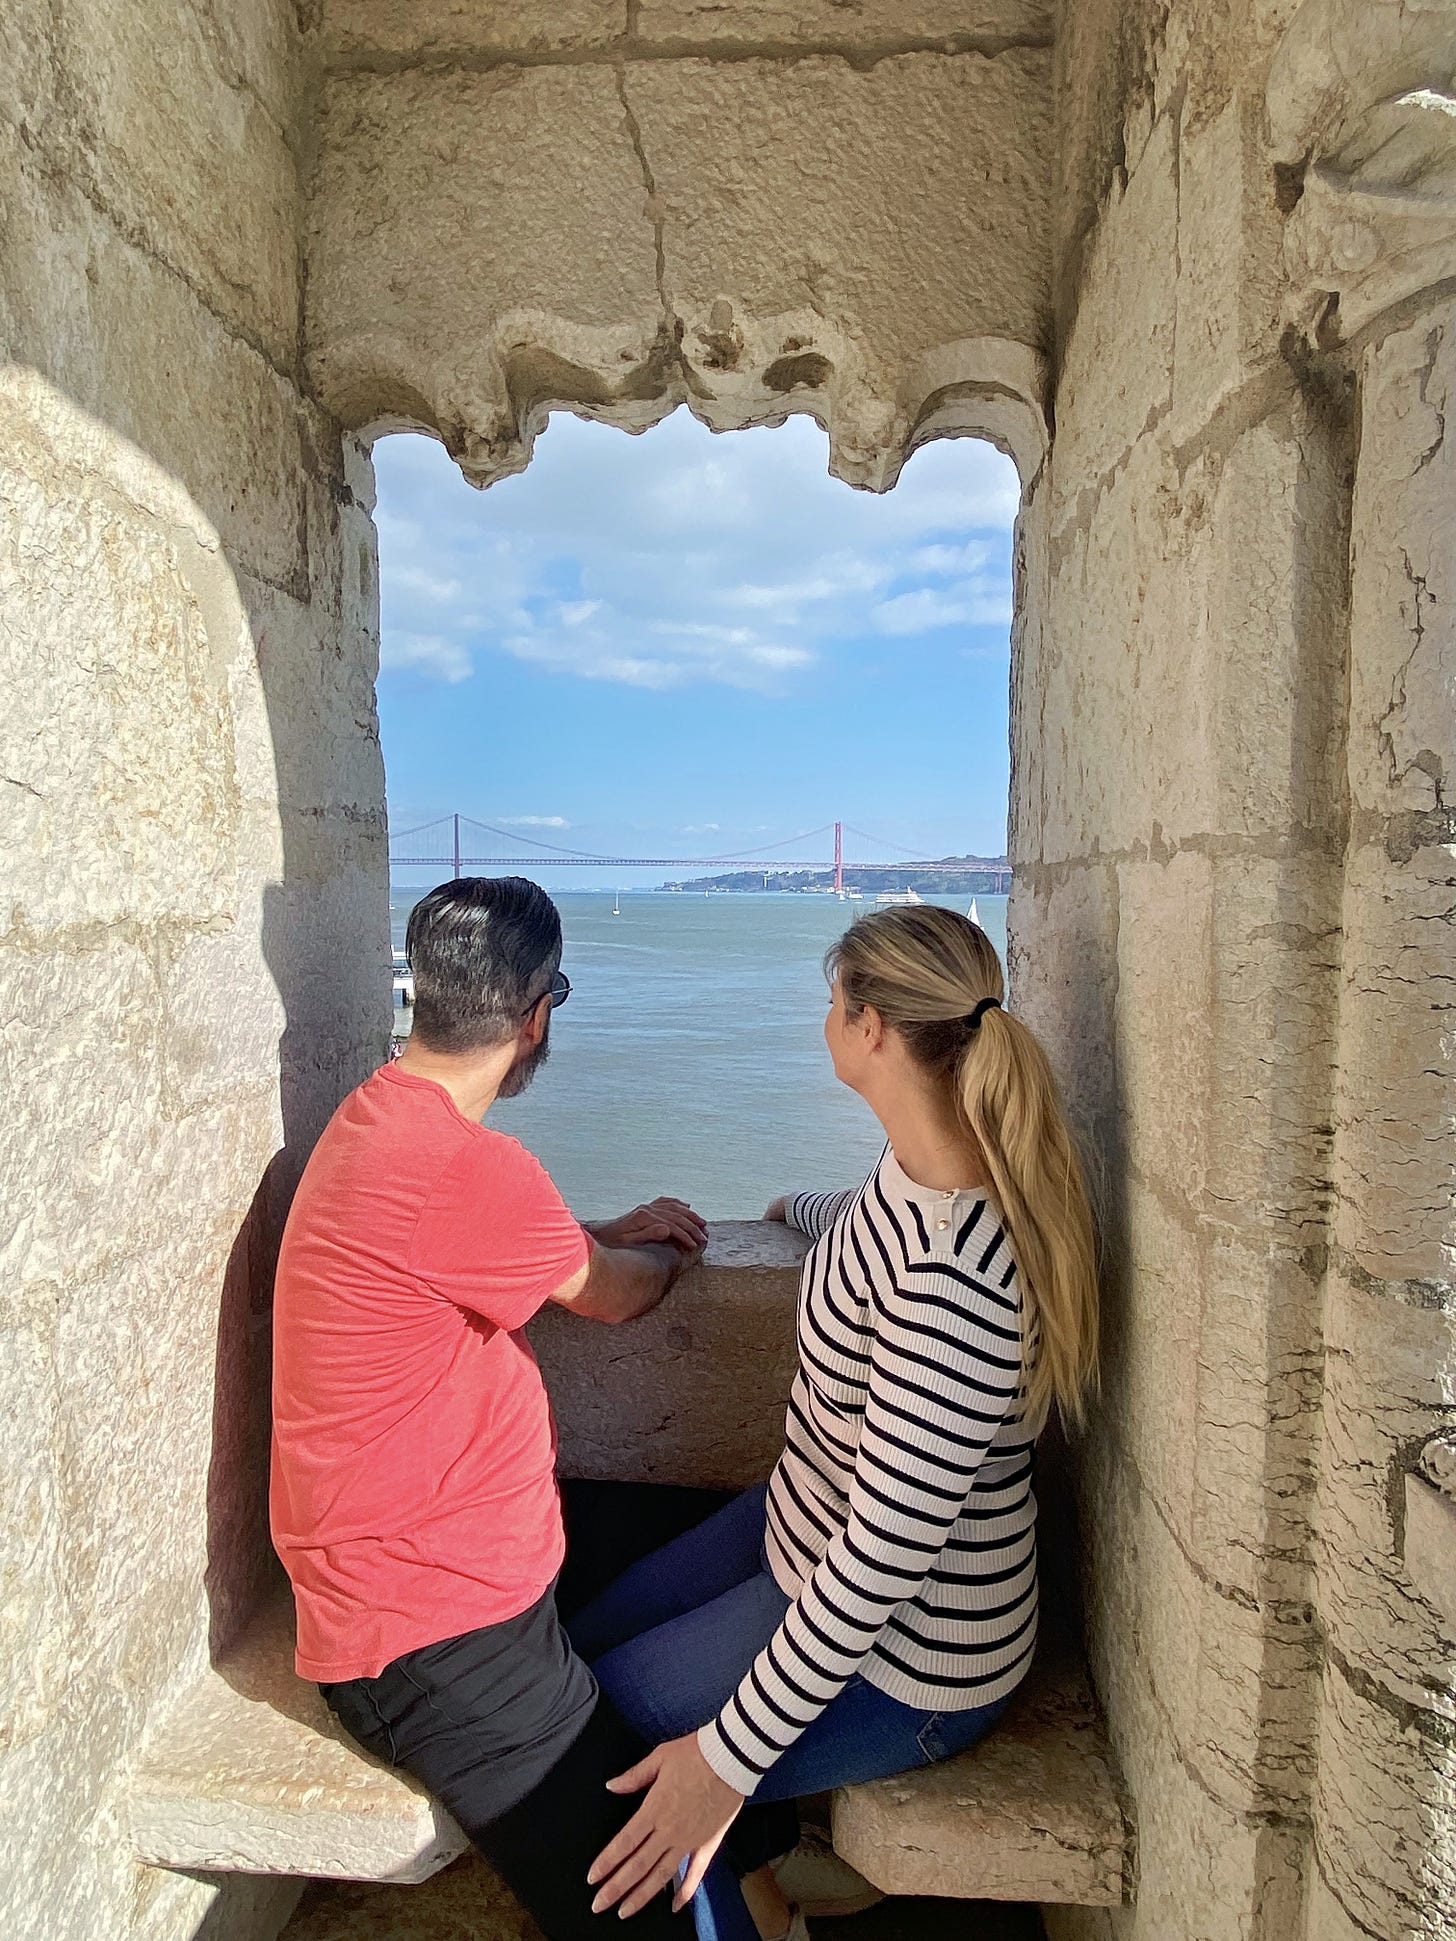 Michael and Melissa of Tourabunga peering out of the window of the Belém Tower, overlooking the river.